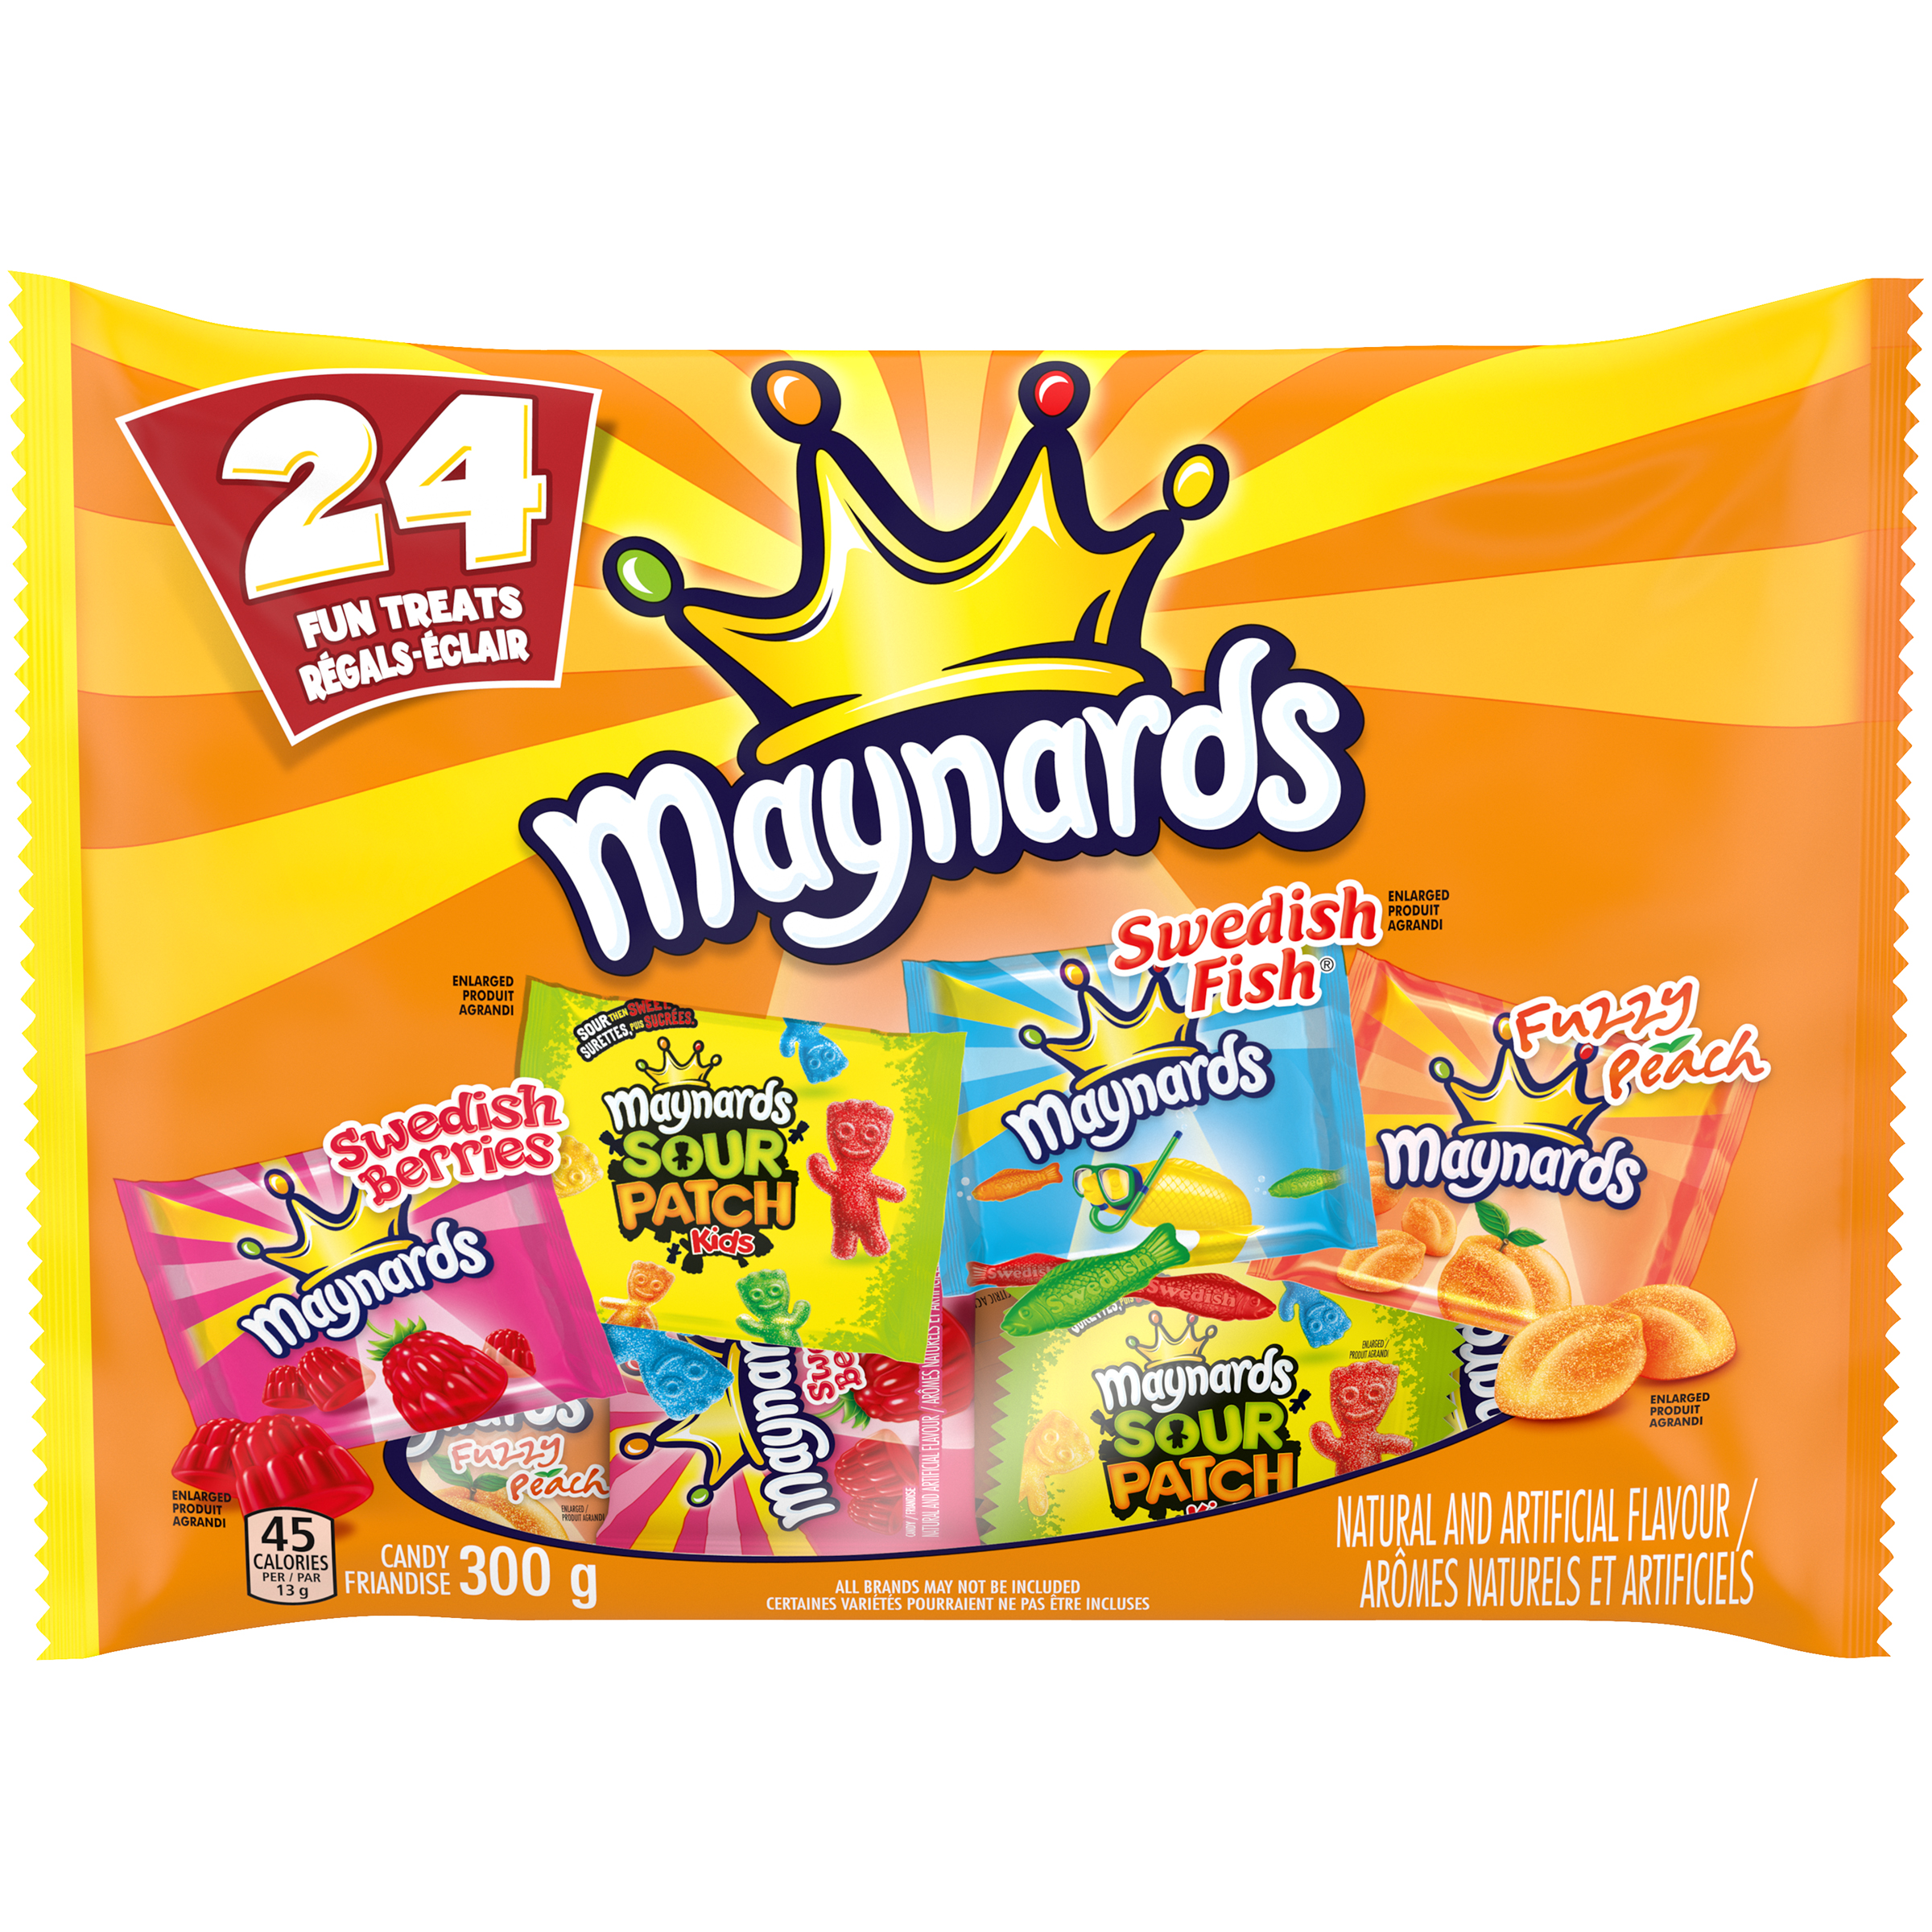 MAYNARDS Candy Assortment for Halloween (24 Fun Treat pouches, 300 g)